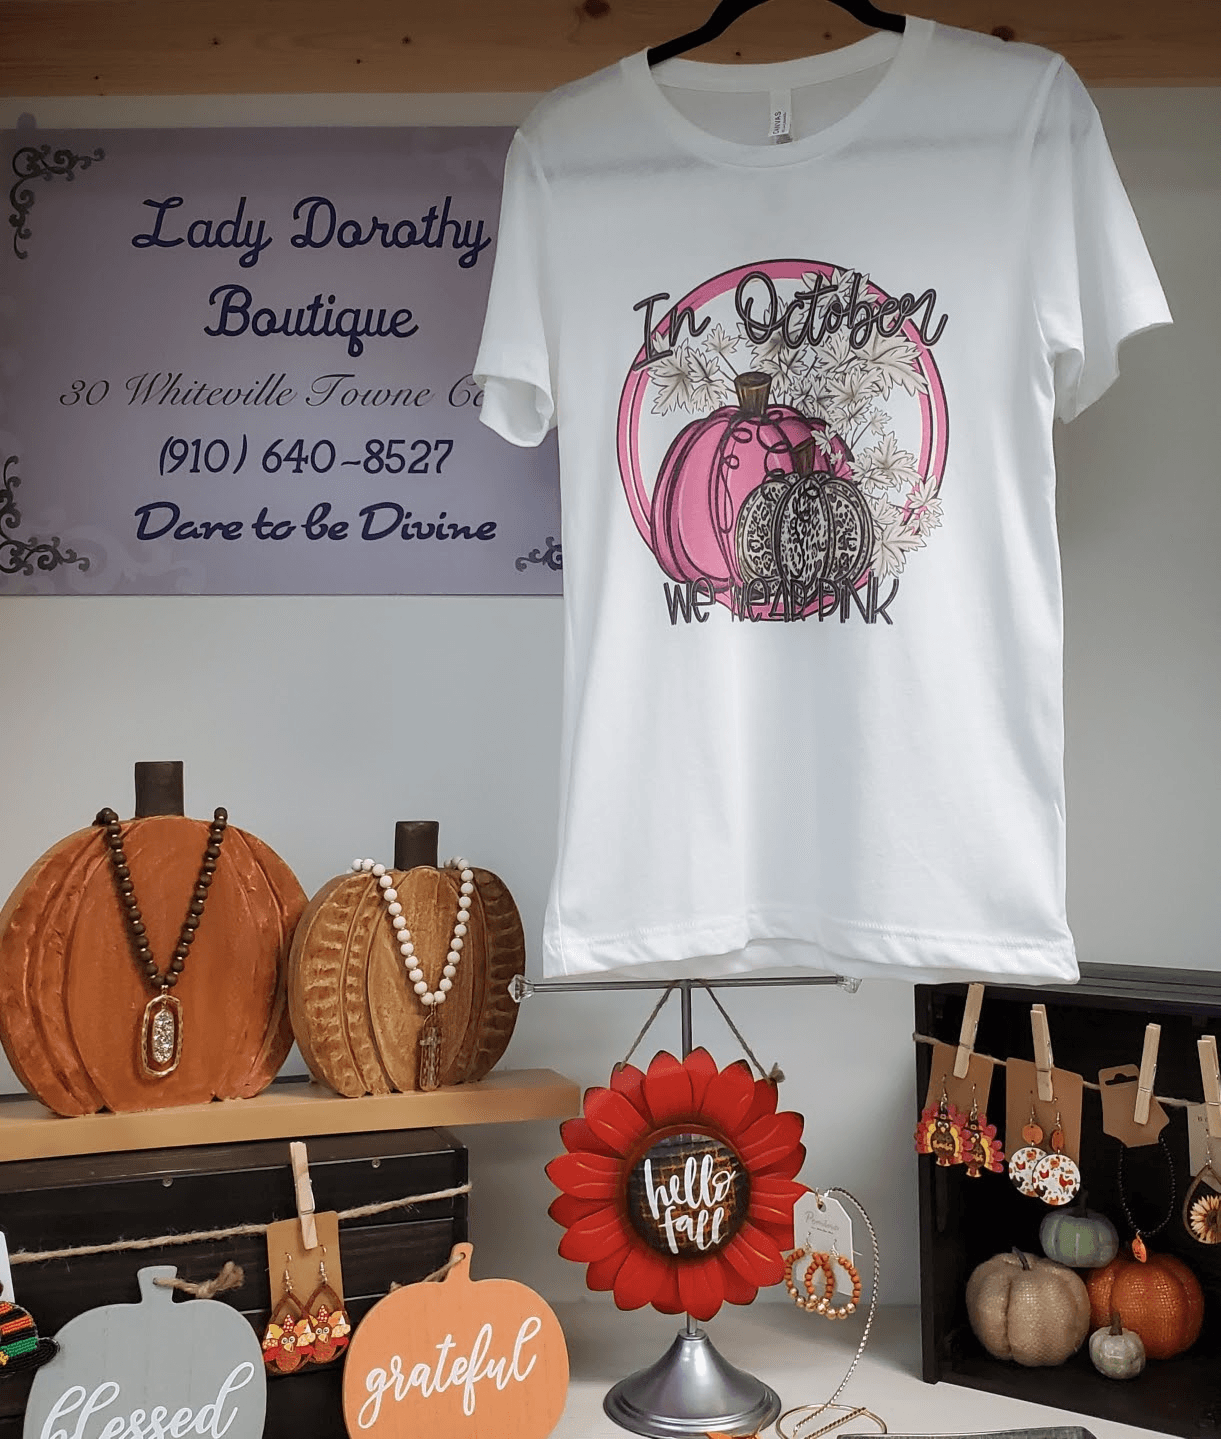 In October We Wear Pink Tee - Lady Dorothy Boutique